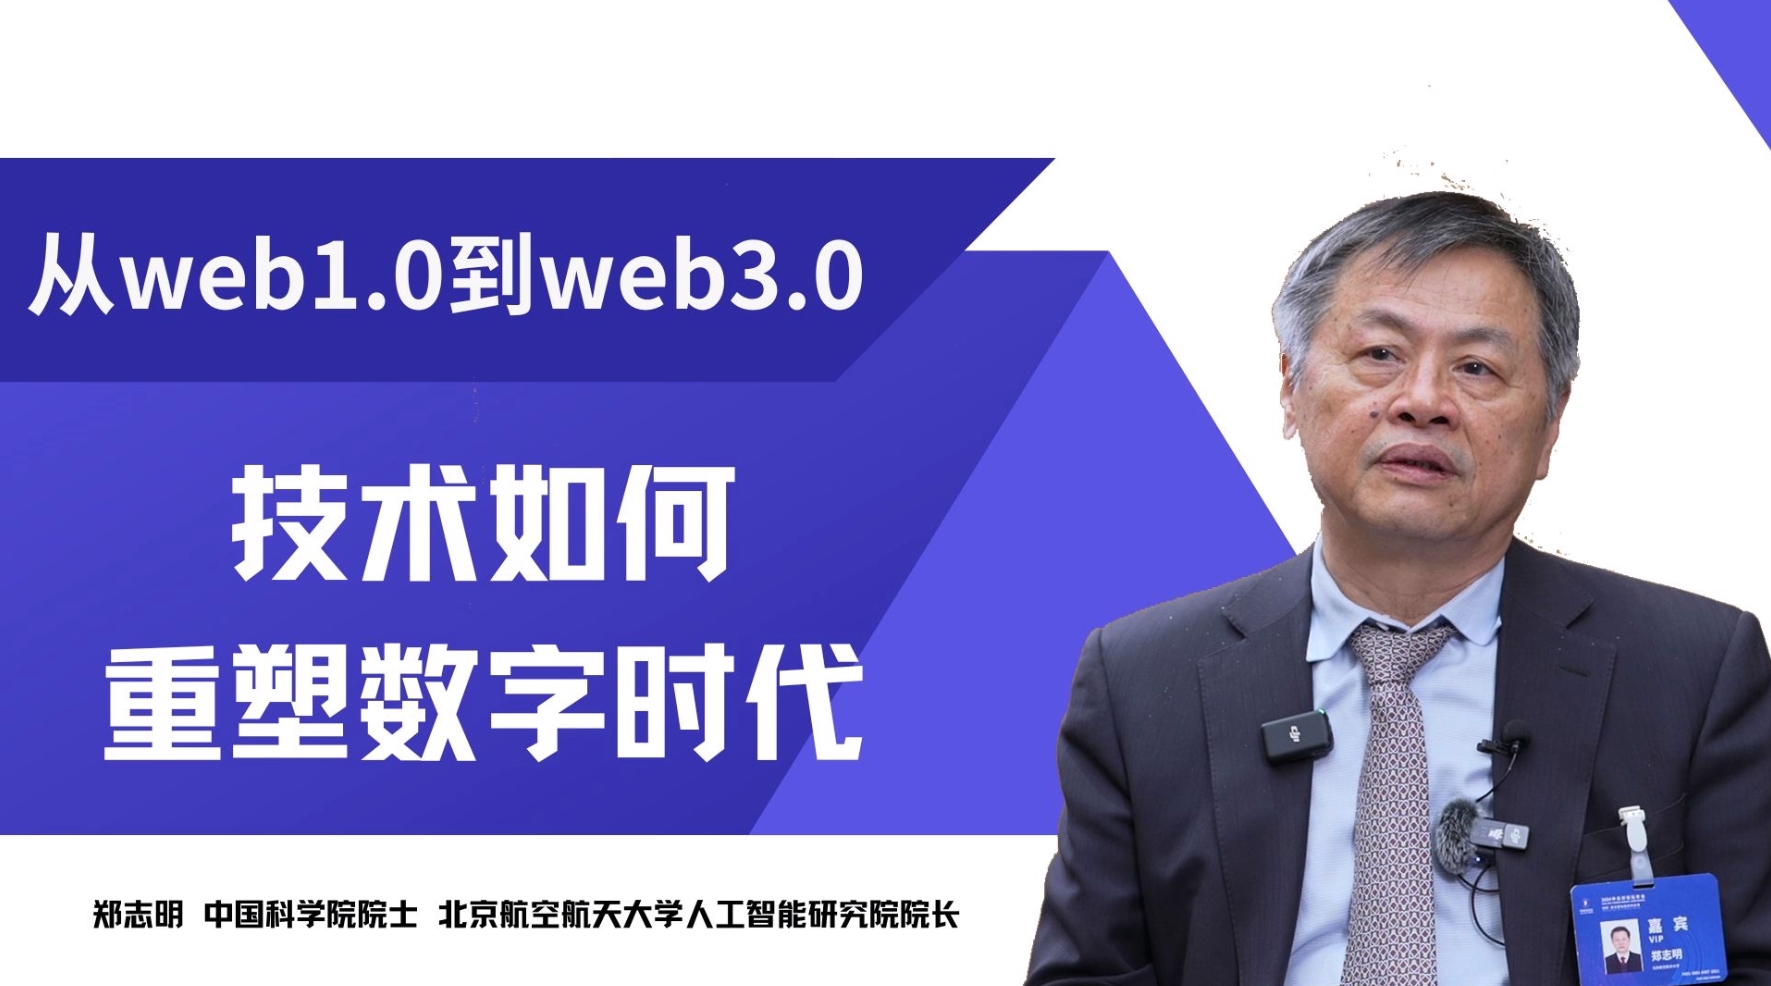 From web1.0 to web3.0, info expertise is reshaping the digital era_Guangming.com